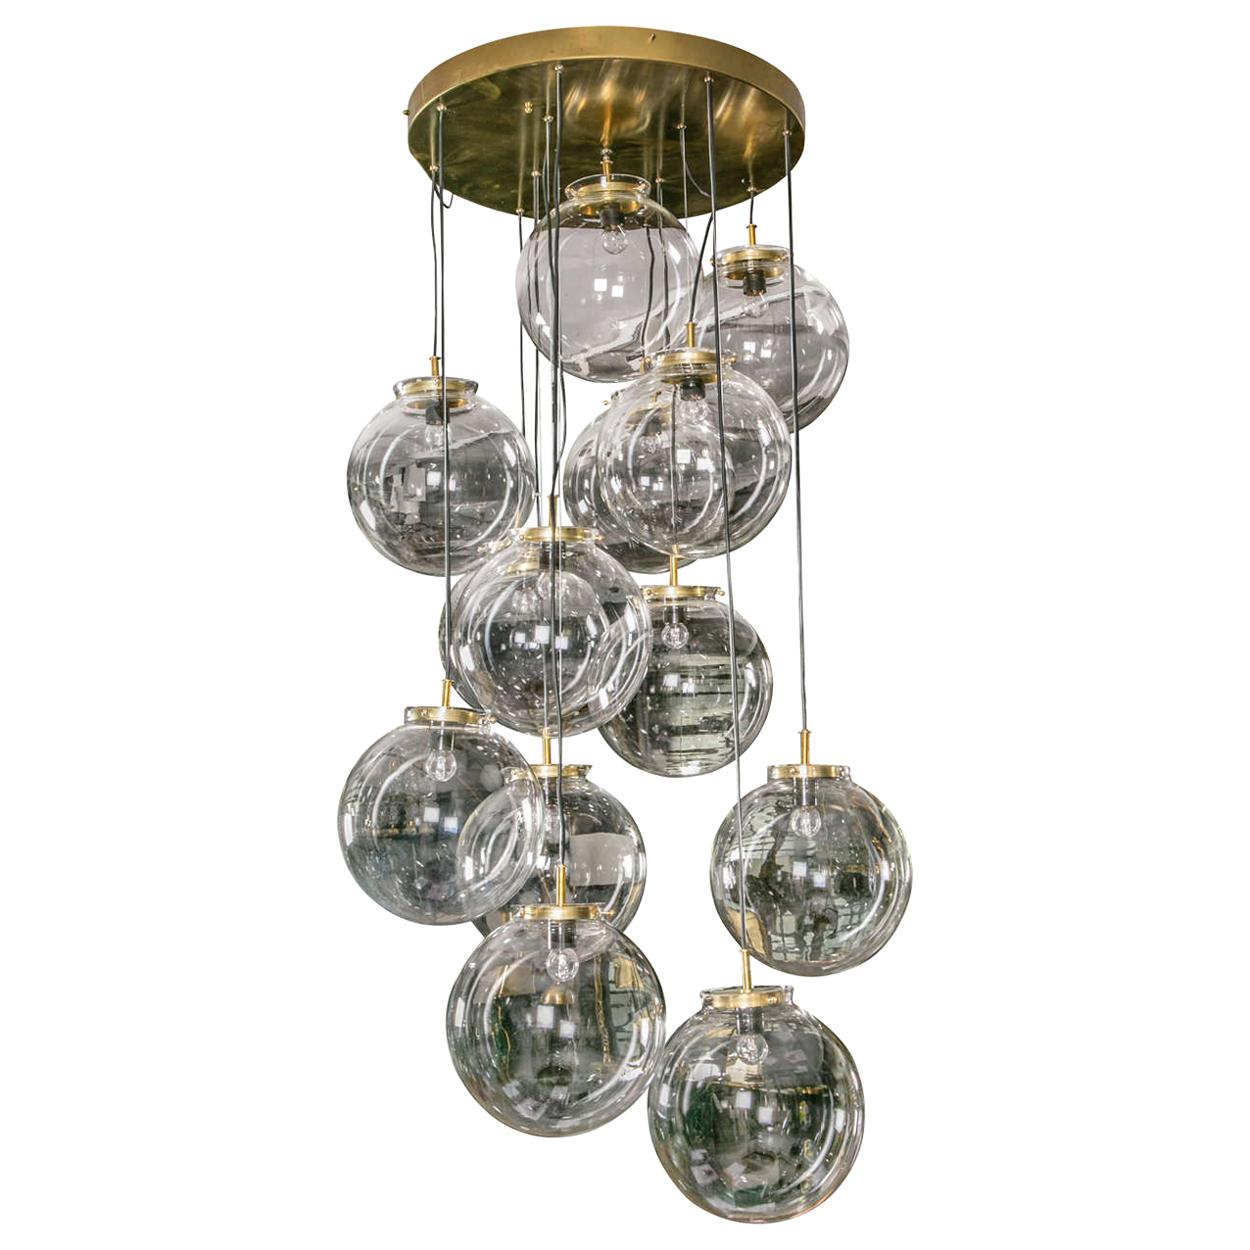 Pendant Chandelier with Thirteen Glass Globes